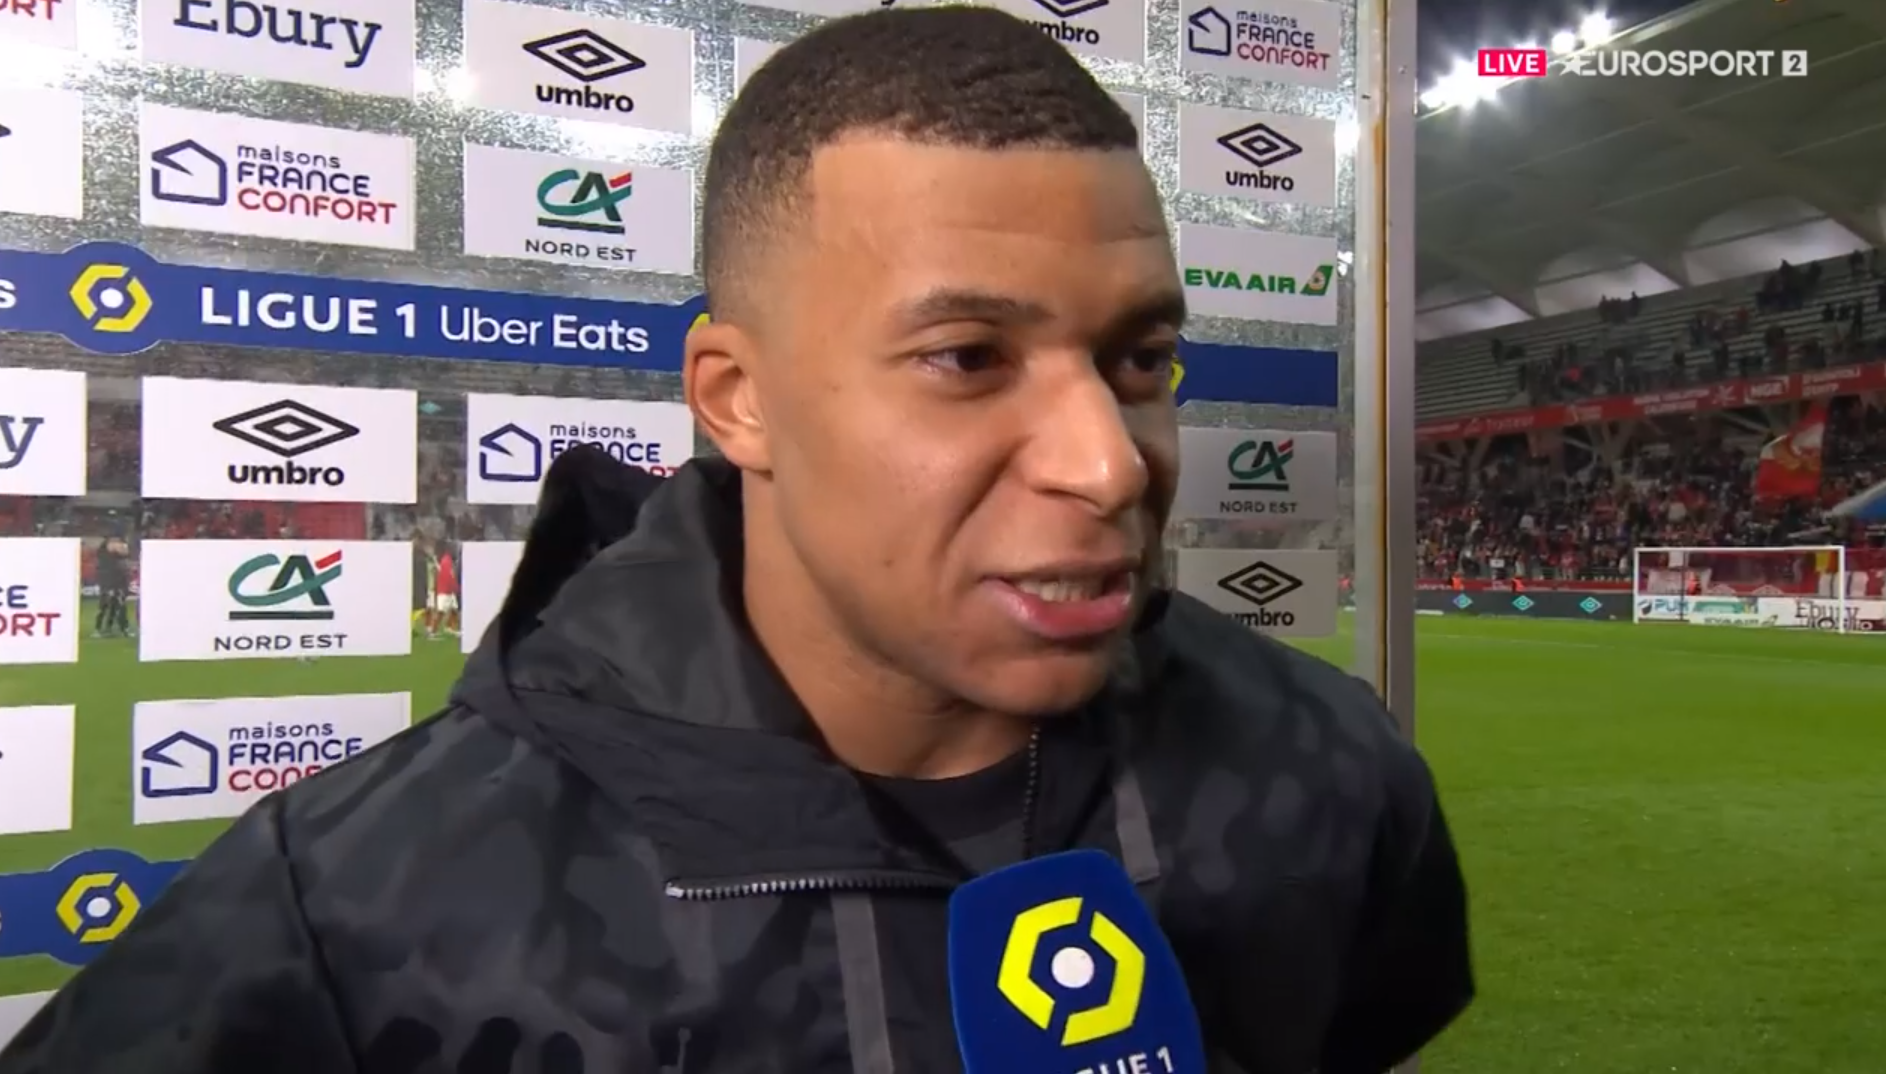 Mbappe on his future: The most important thing for me now is to play